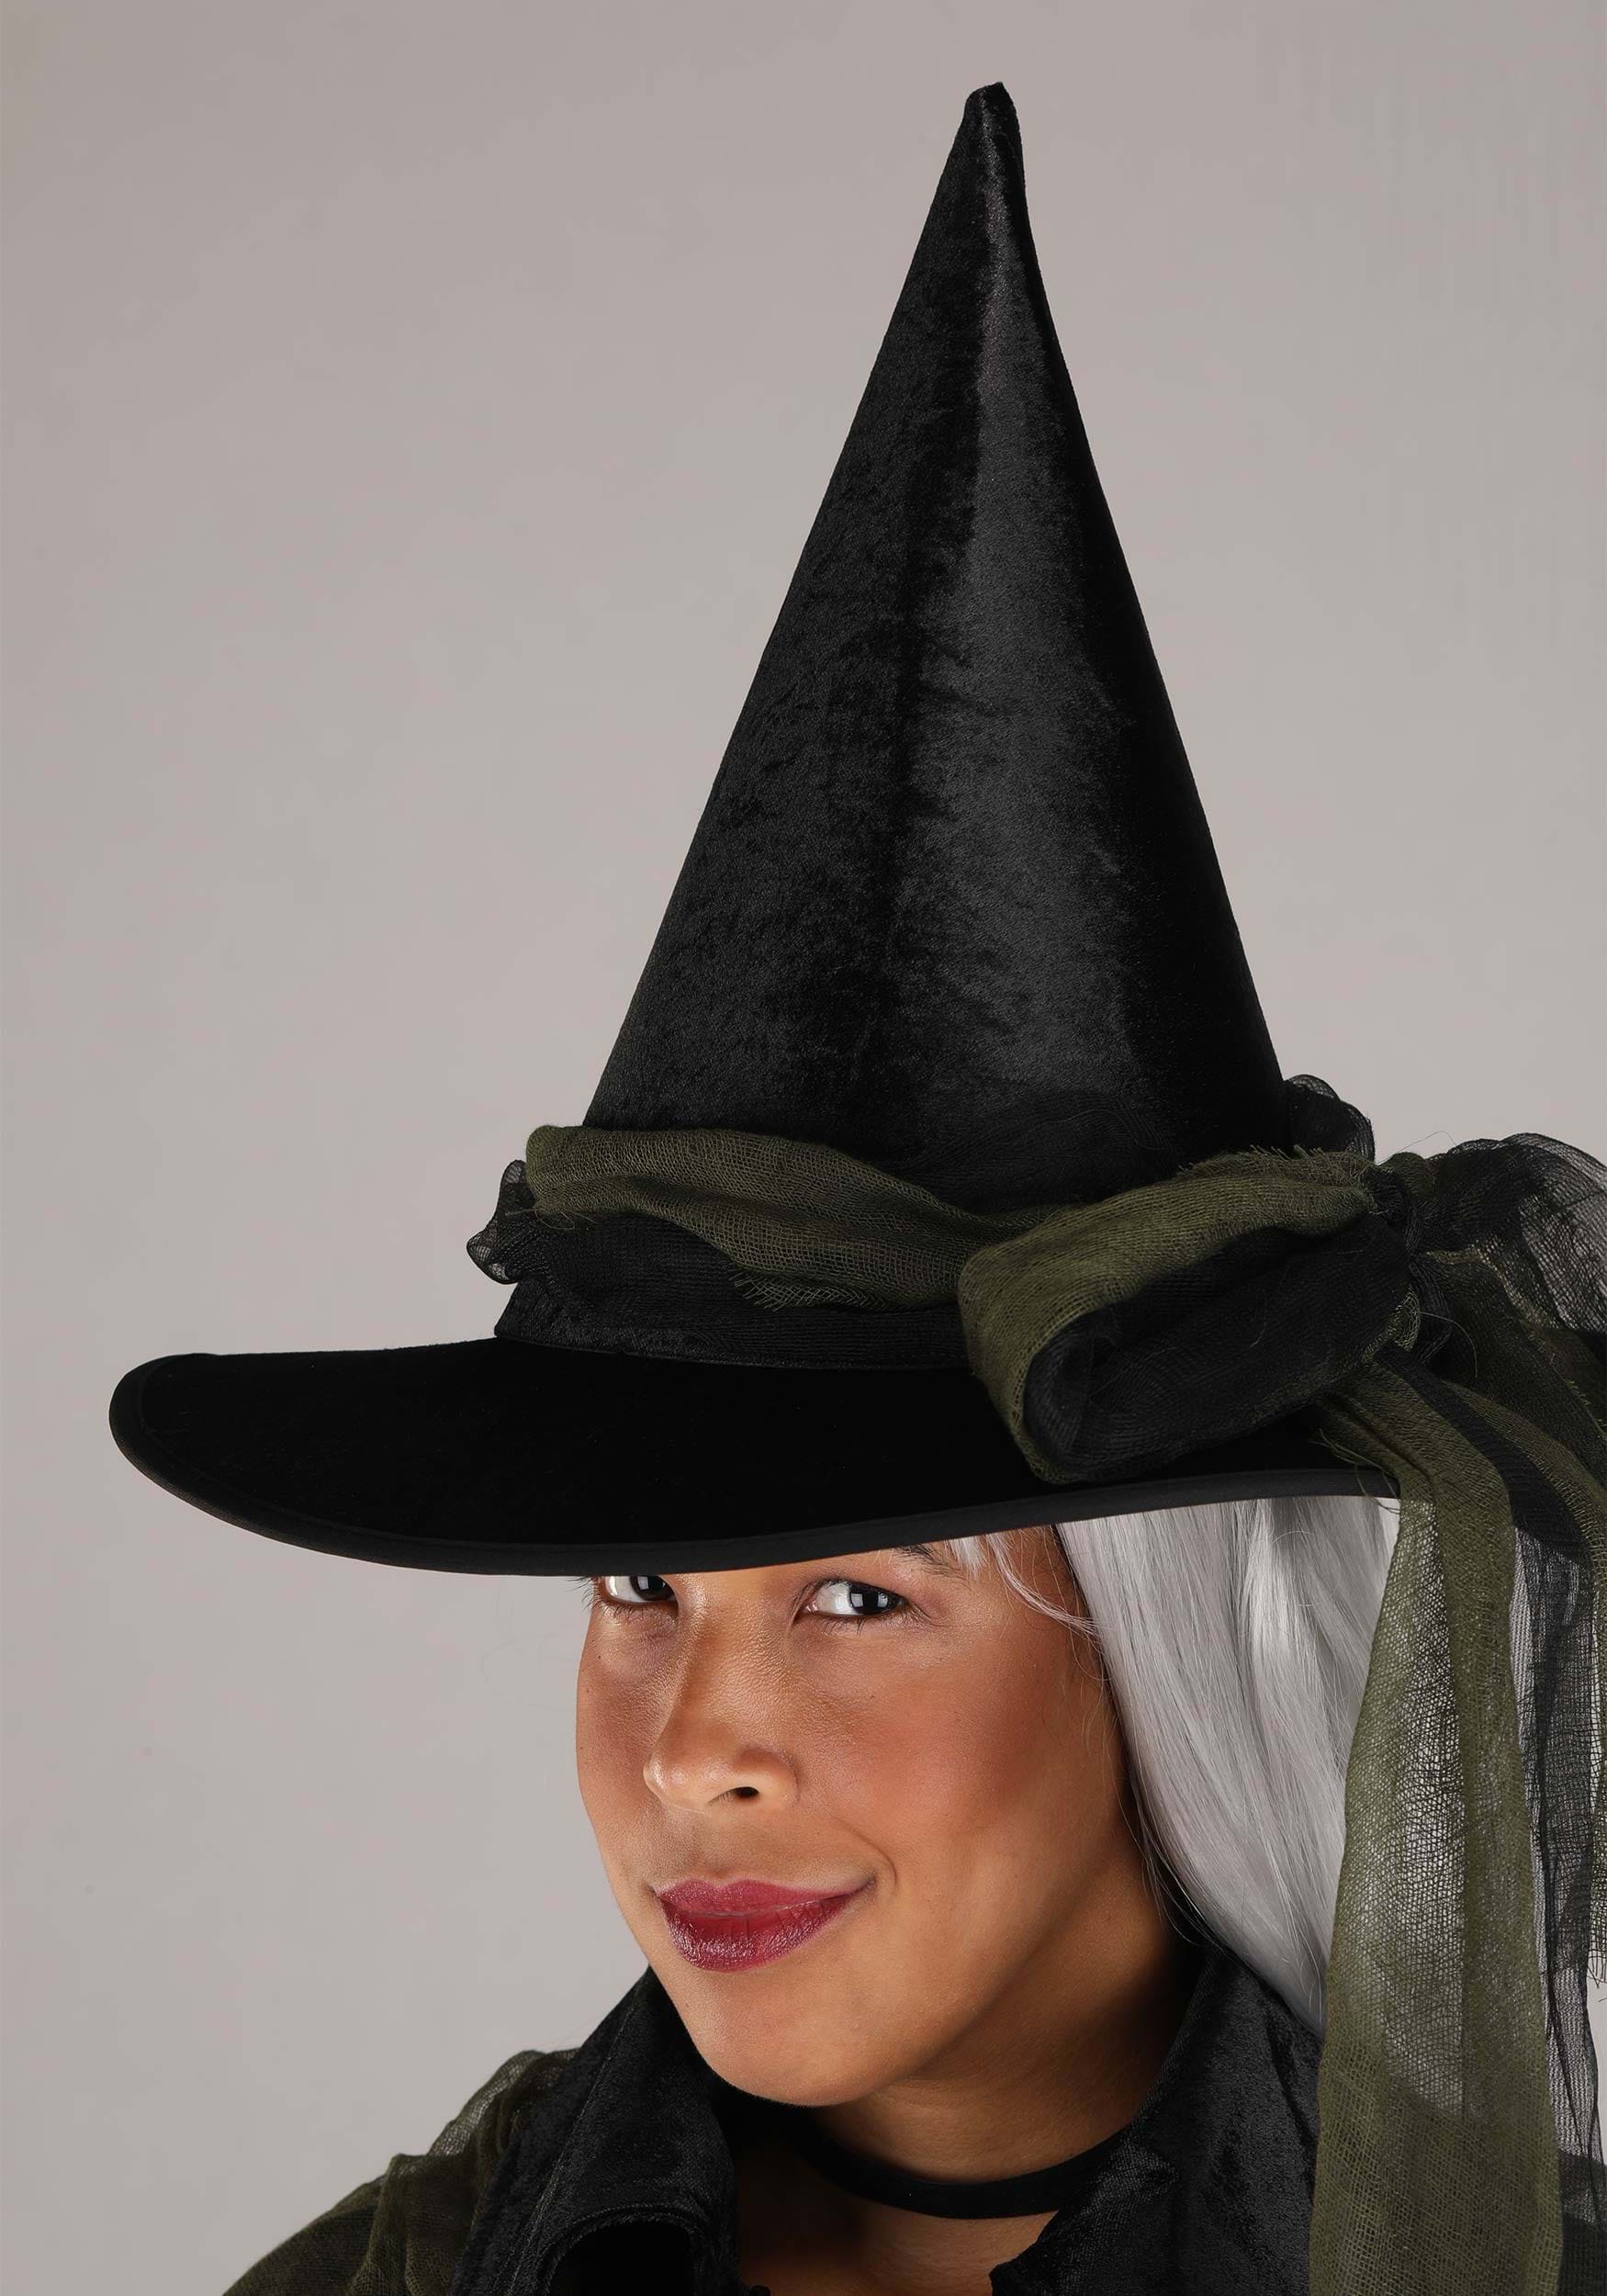 Lady Witch Dress Sorceress Costume with Witch Hat for Halloween